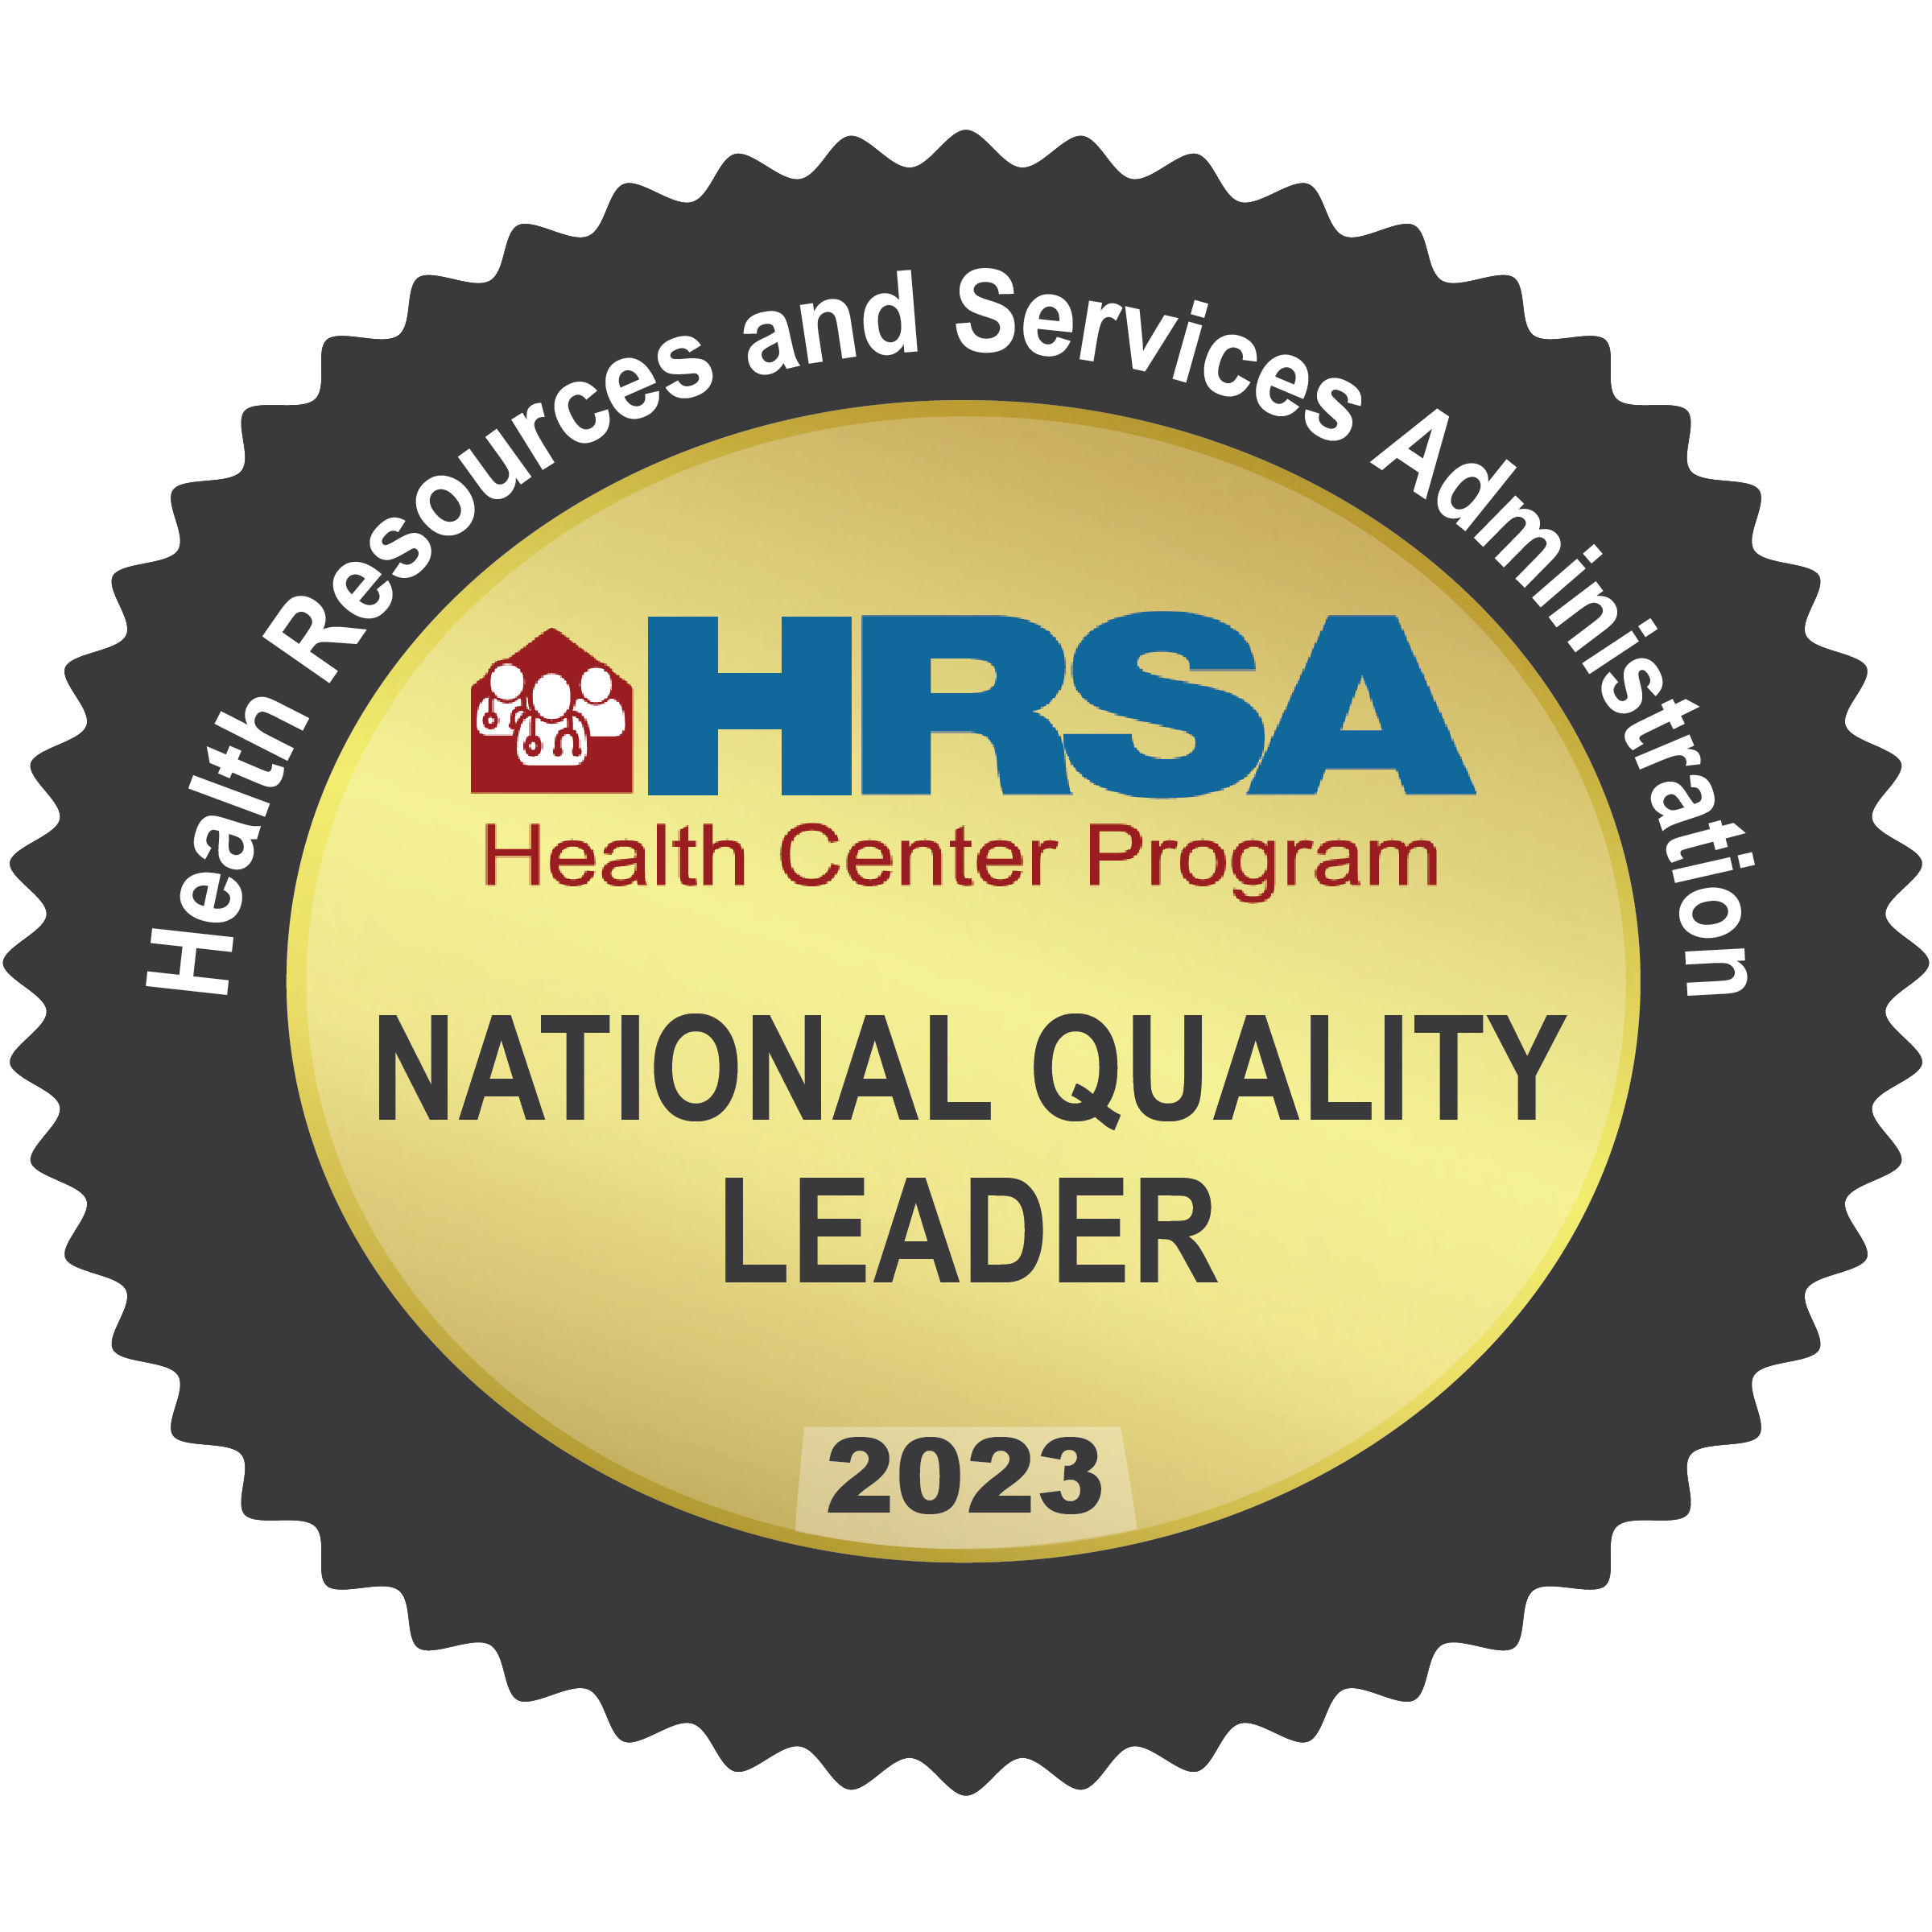 National Quality Leader